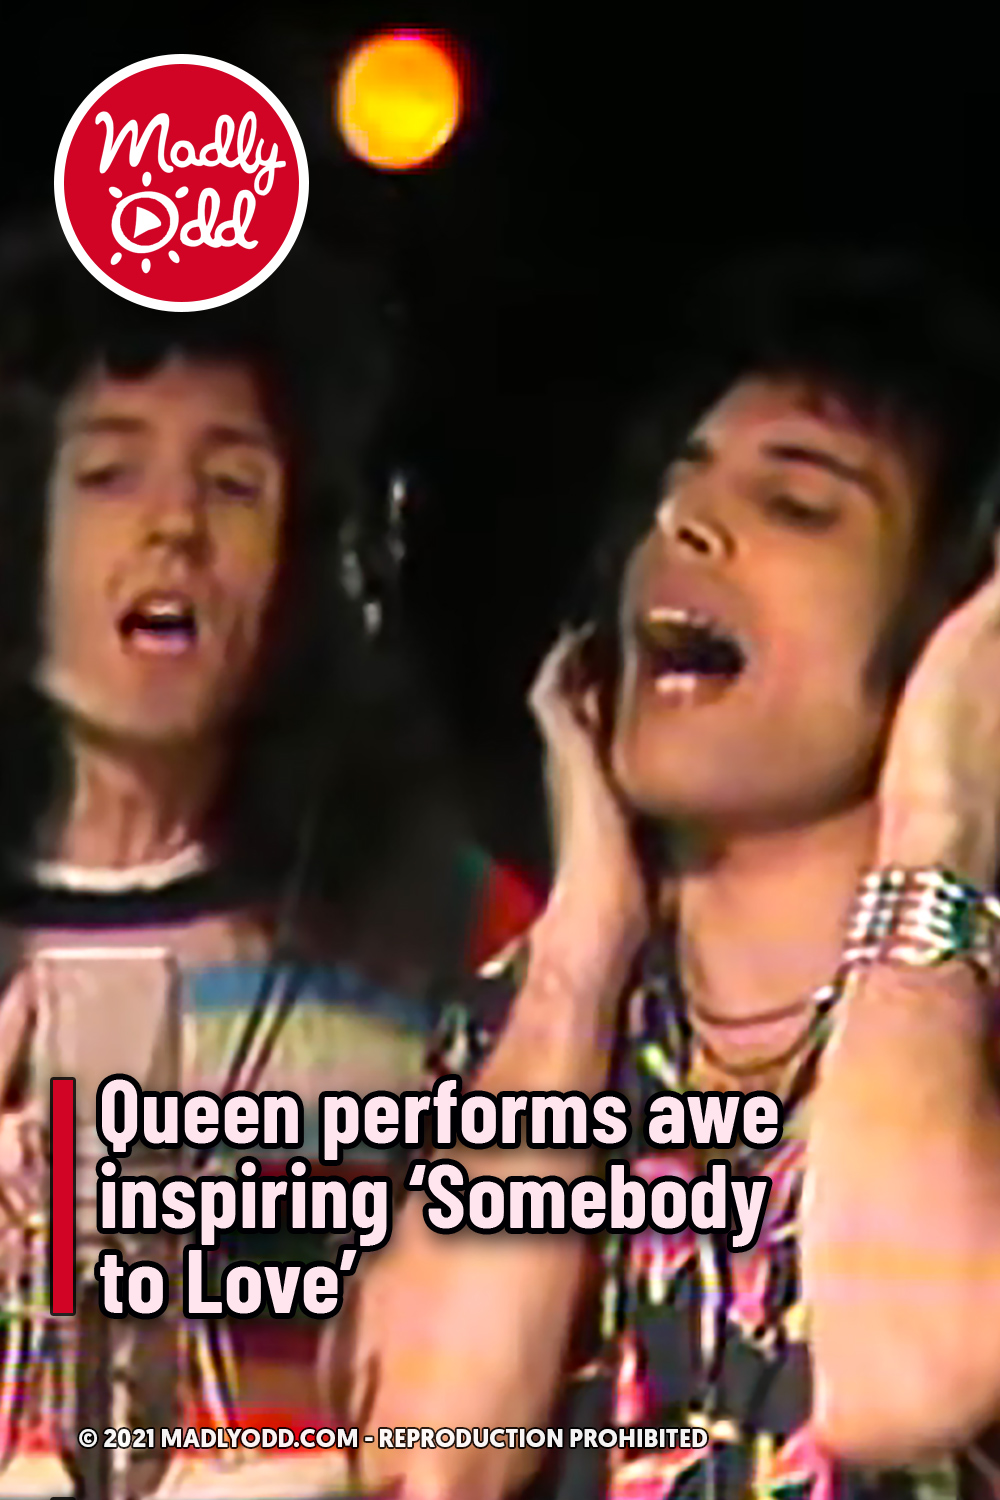 Queen performs awe inspiring ‘Somebody to Love’